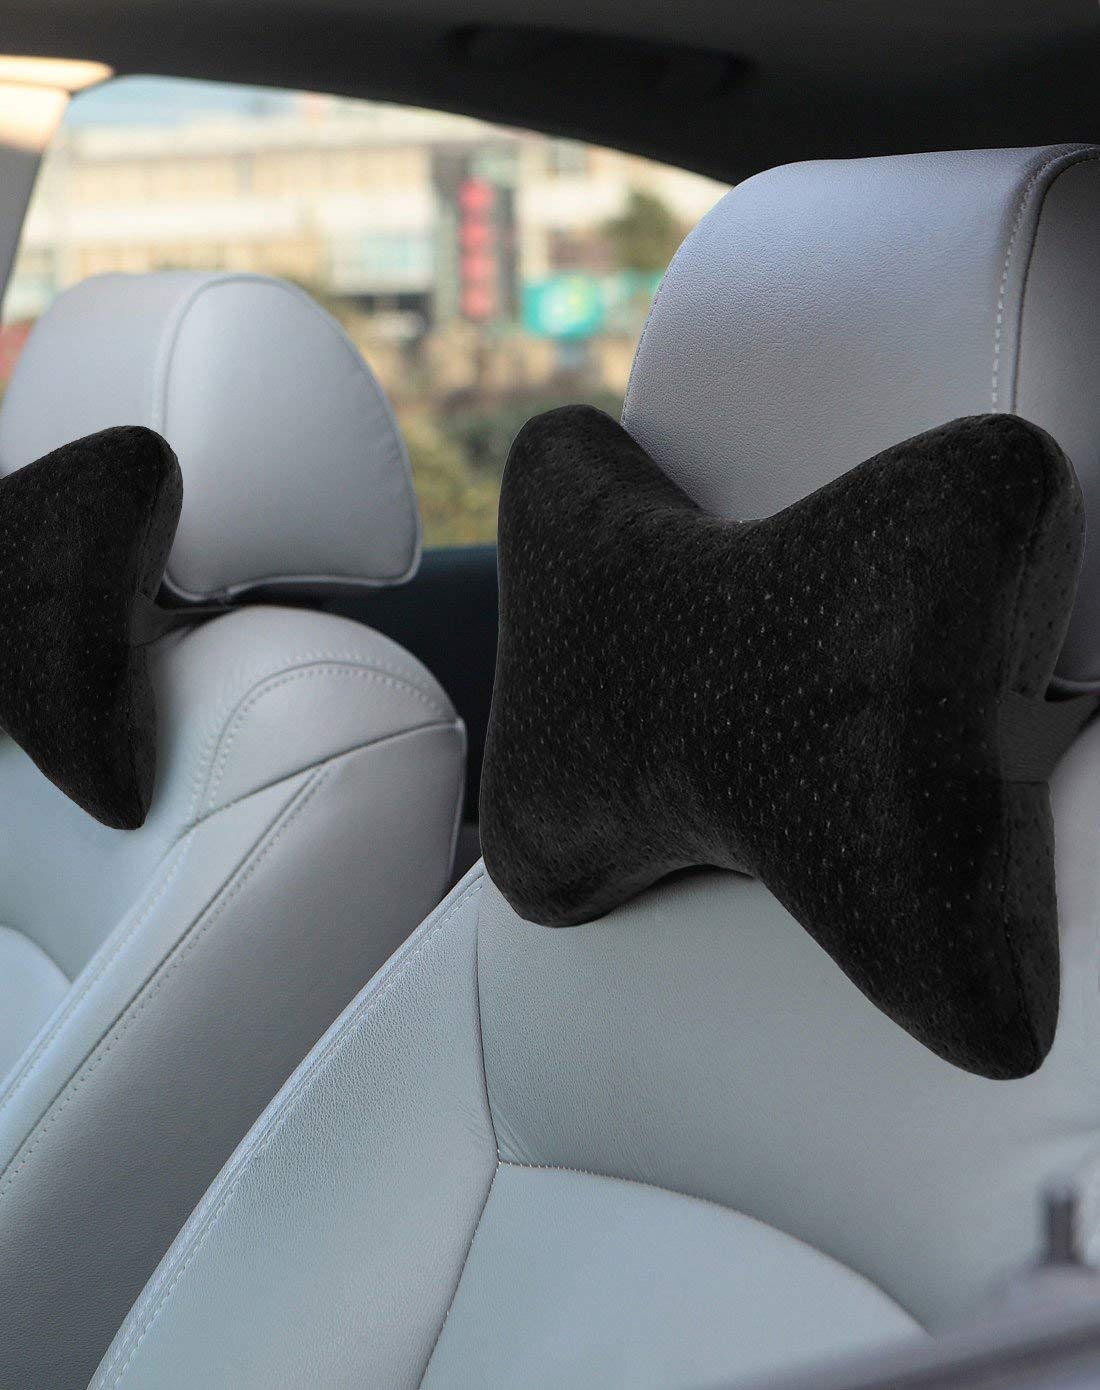 The 10 Best Headrest Pillows for Your 